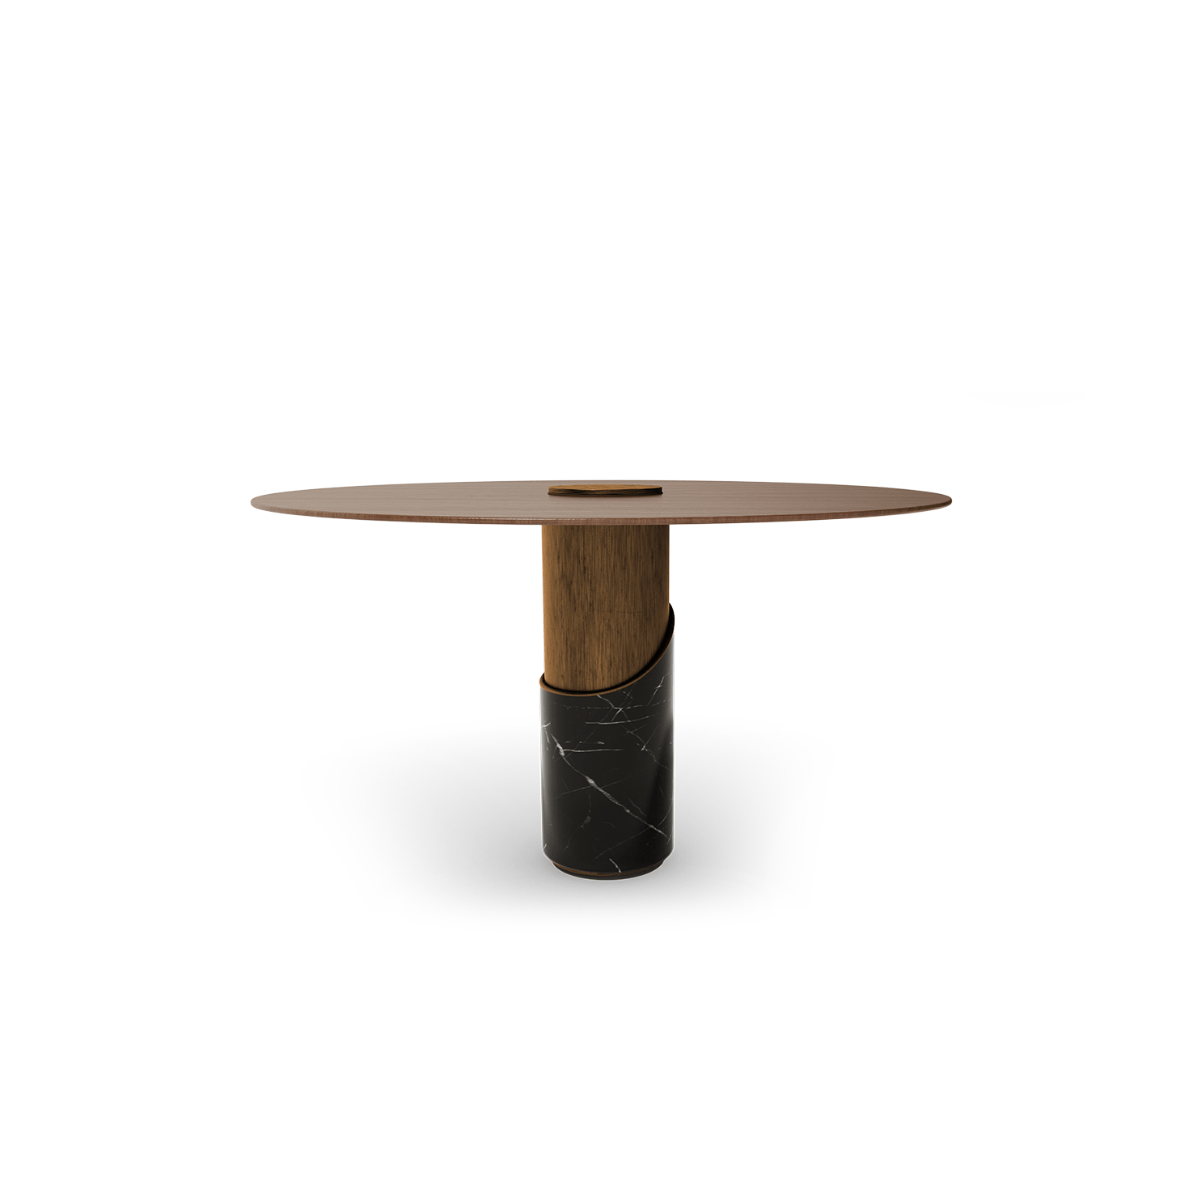 BREVE II DINING TABLE 3 Breve I Dining Table